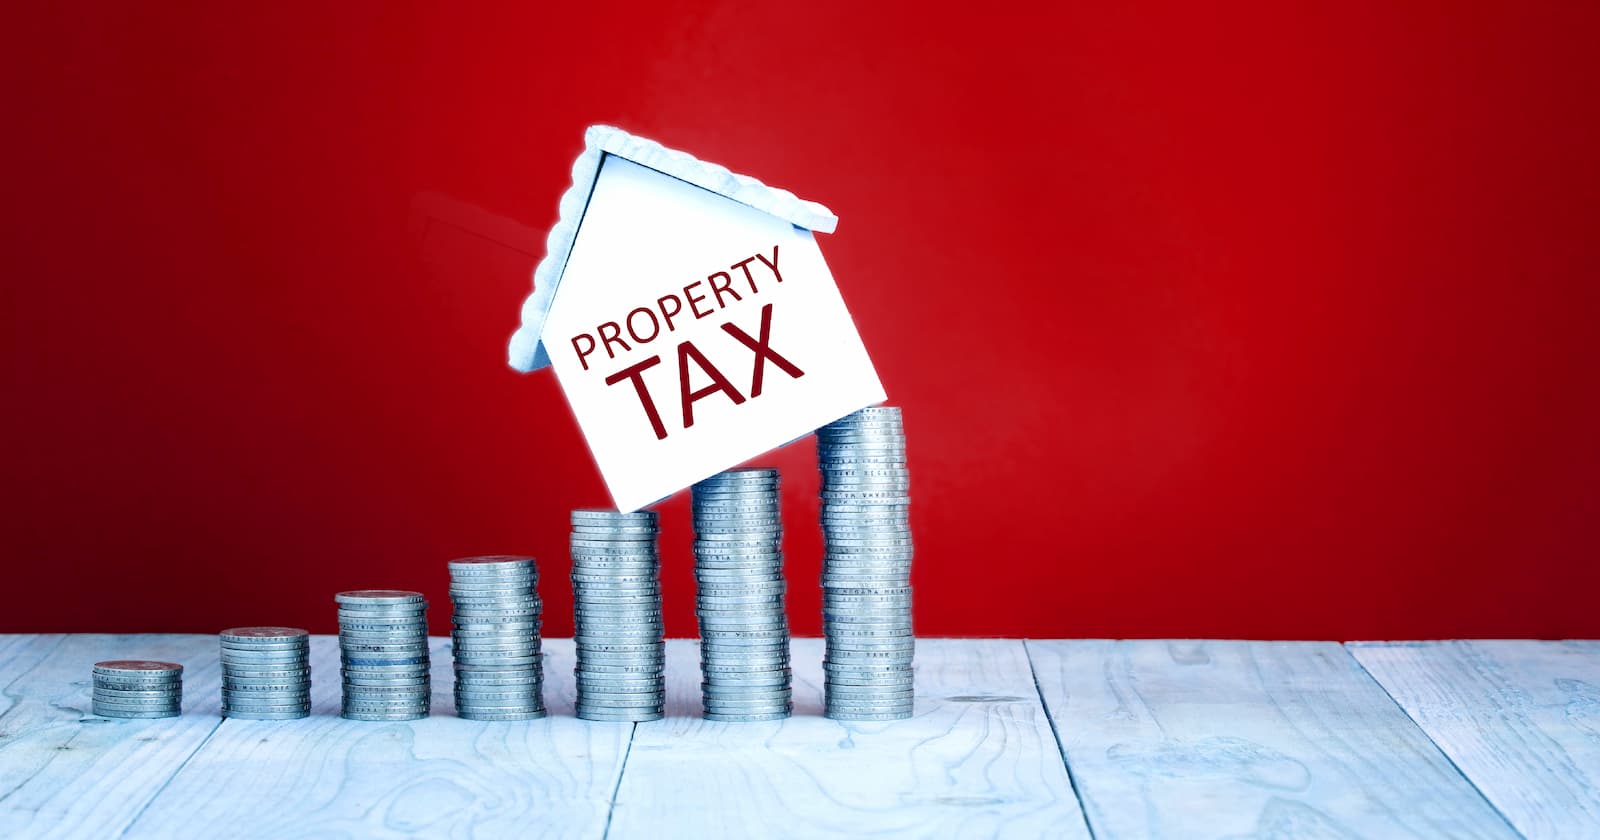 Understand The Property Taxes With Allen Michael Abraham – Allen Michael Abraham is a successful real estate consultant.